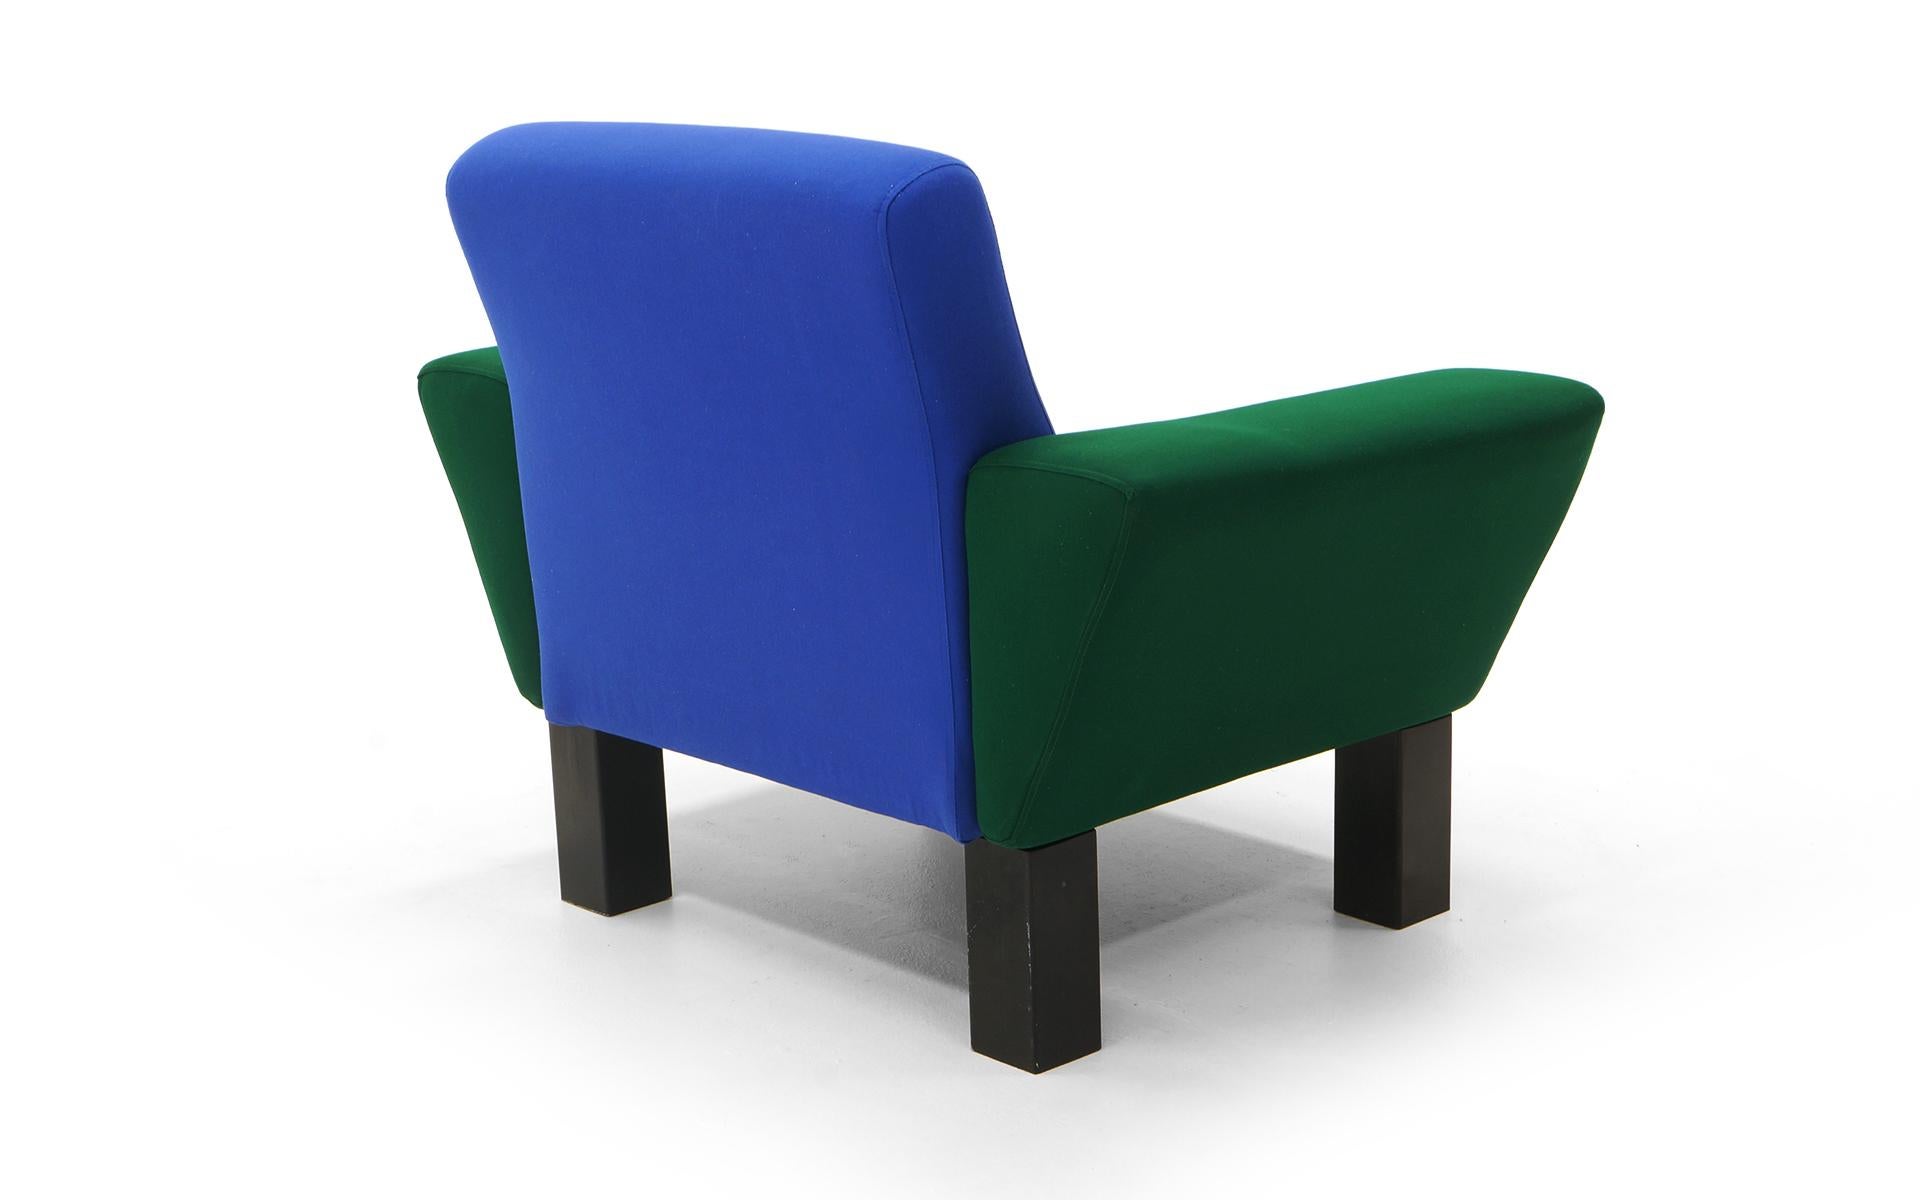 Post-Modern Westside Lounge Chair by Ettore Sottsass for Knoll, 1983, Expertly Reupholstered